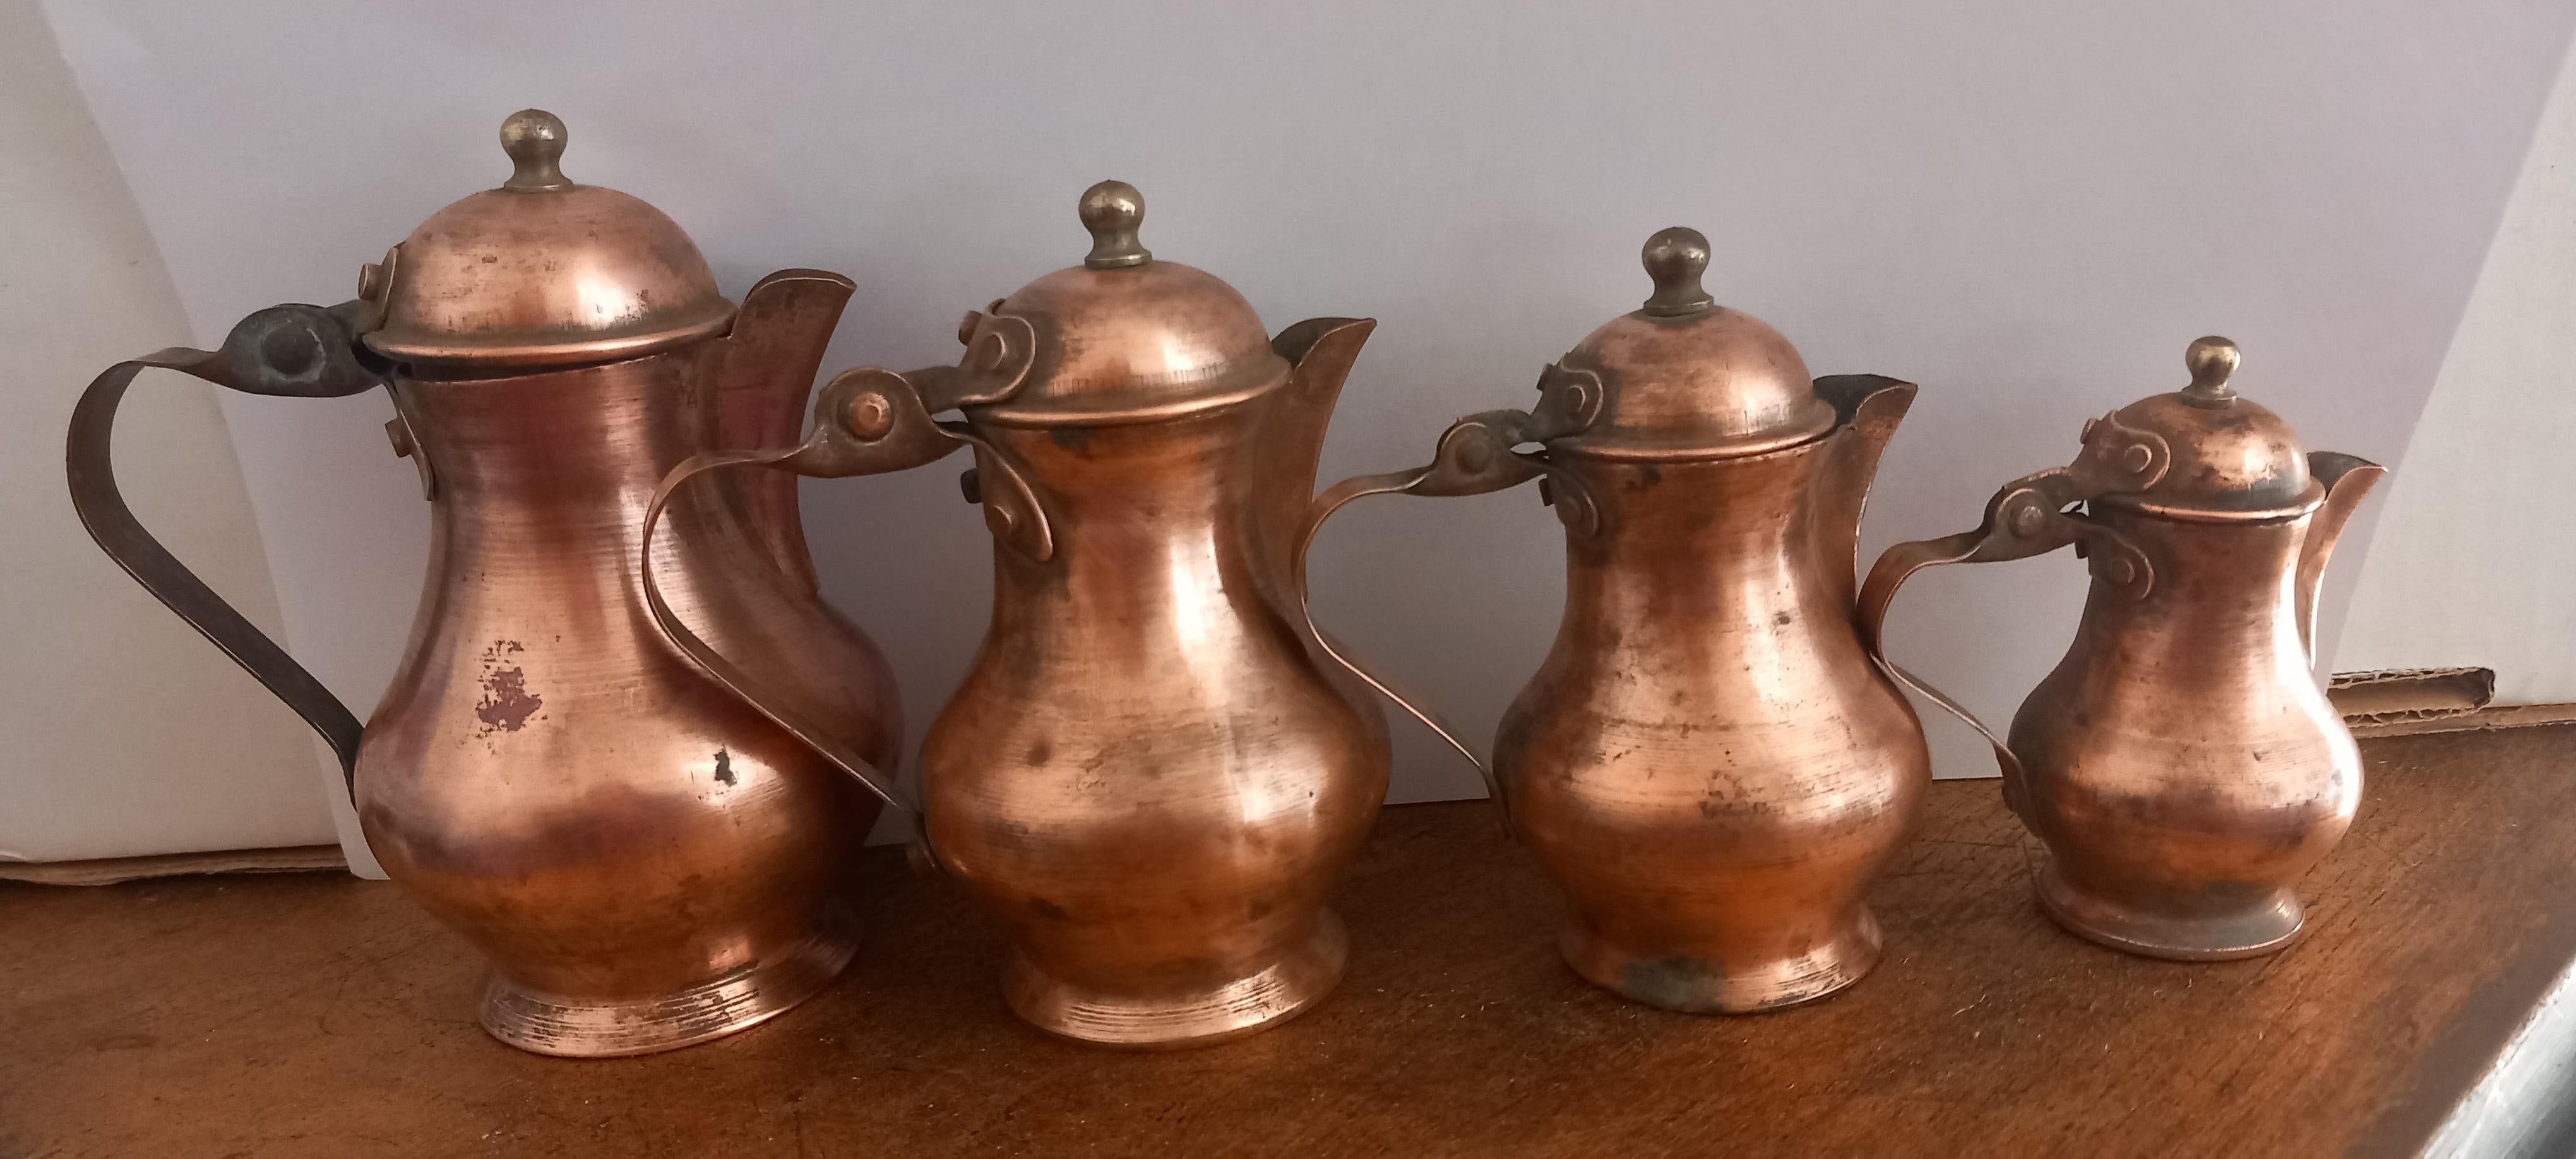 Italian  Copper Kitchen Decoration Vintage Coffee Pots  Smalls For Rustic  Lot of four For Sale